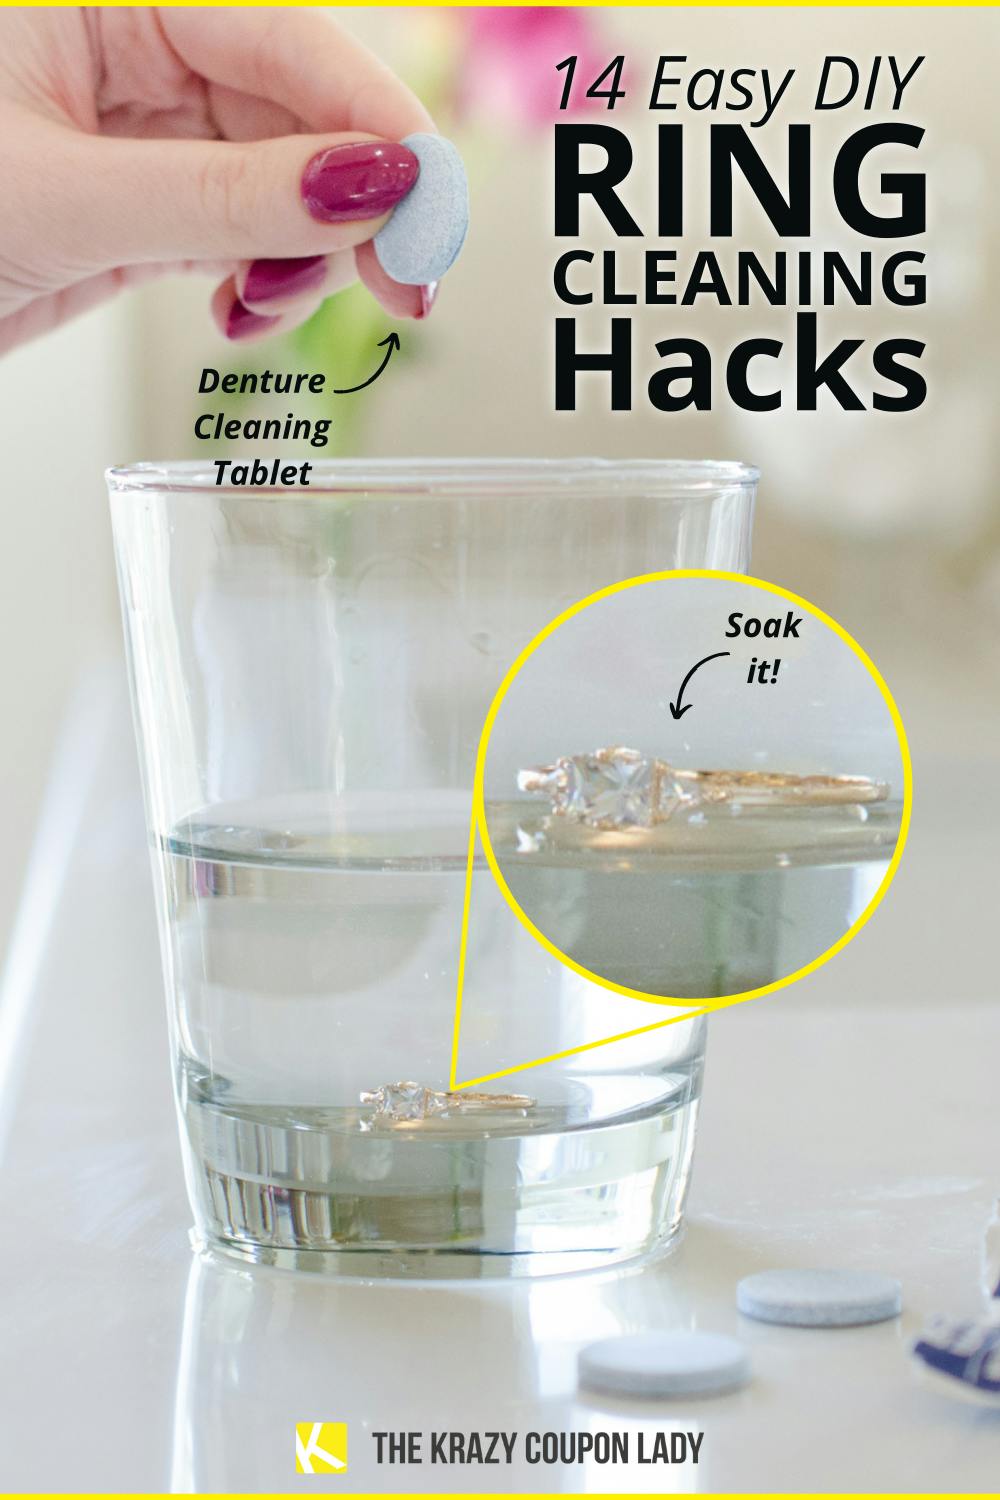 How to Clean Rings at Home With Common Household Items